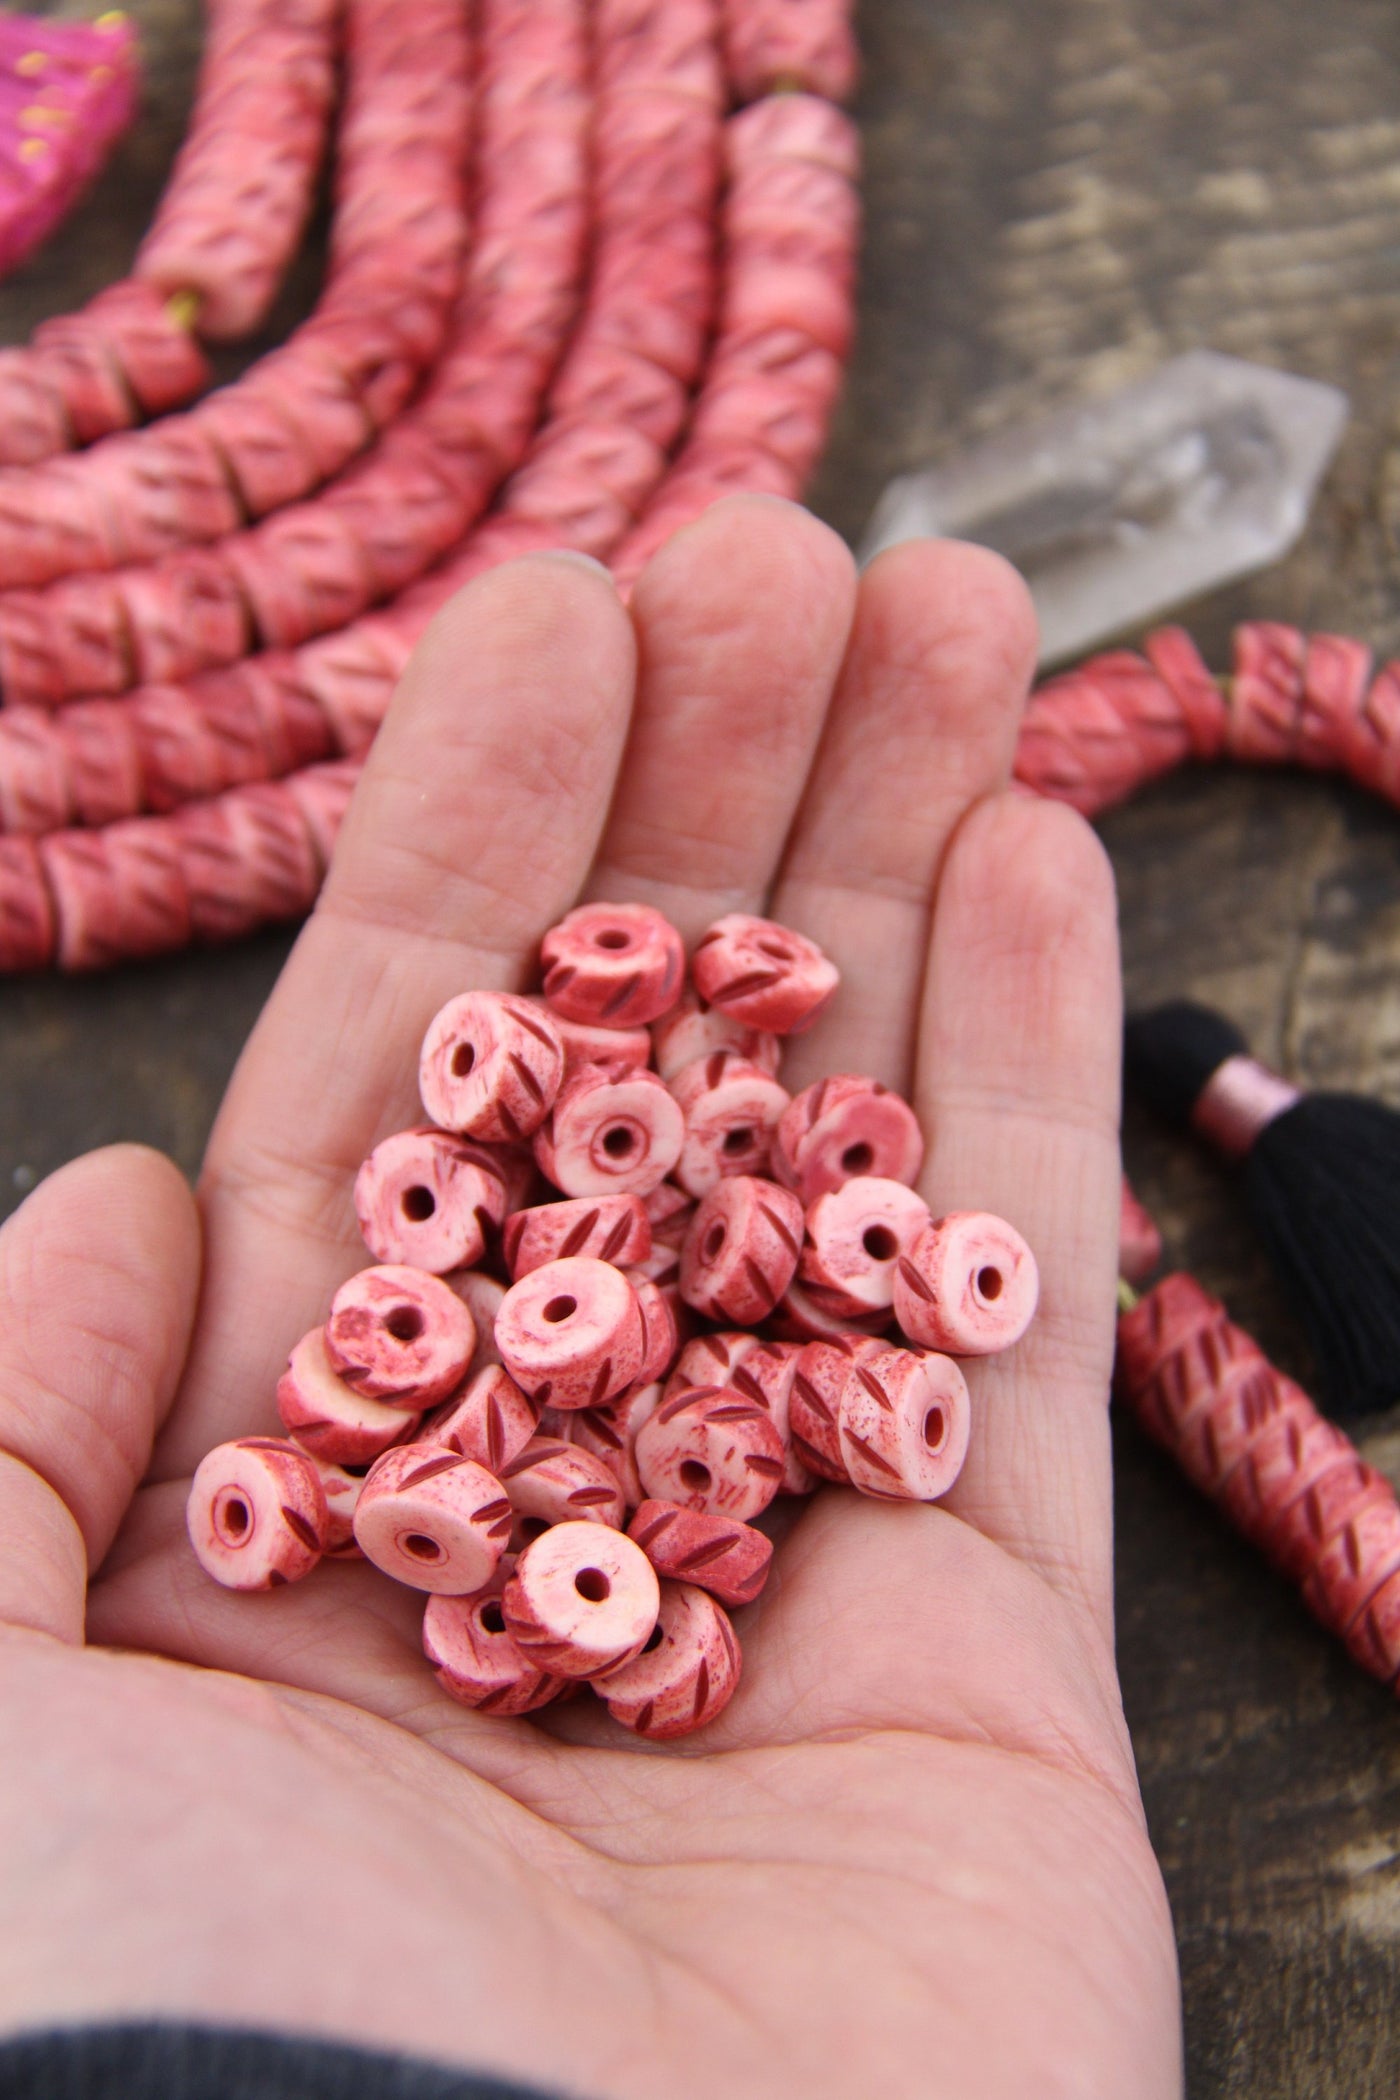 Red Slant: Handmade Carved Bone Disc Heishi Spacer Beads, 10x5mm, Christmas Holiday Jewelry Making